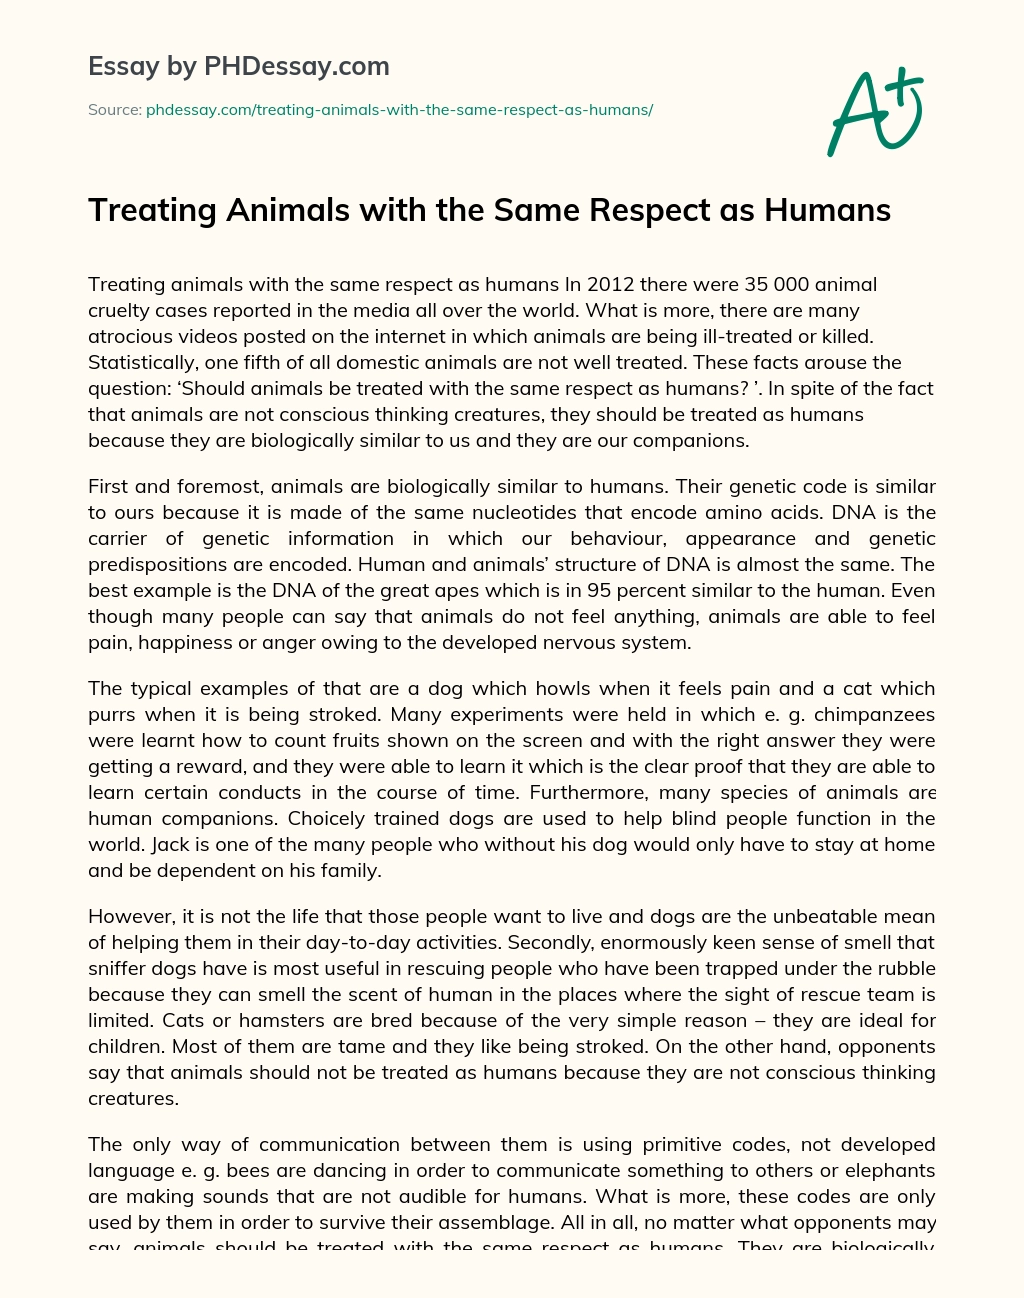 Treating Animals with the Same Respect as Humans essay